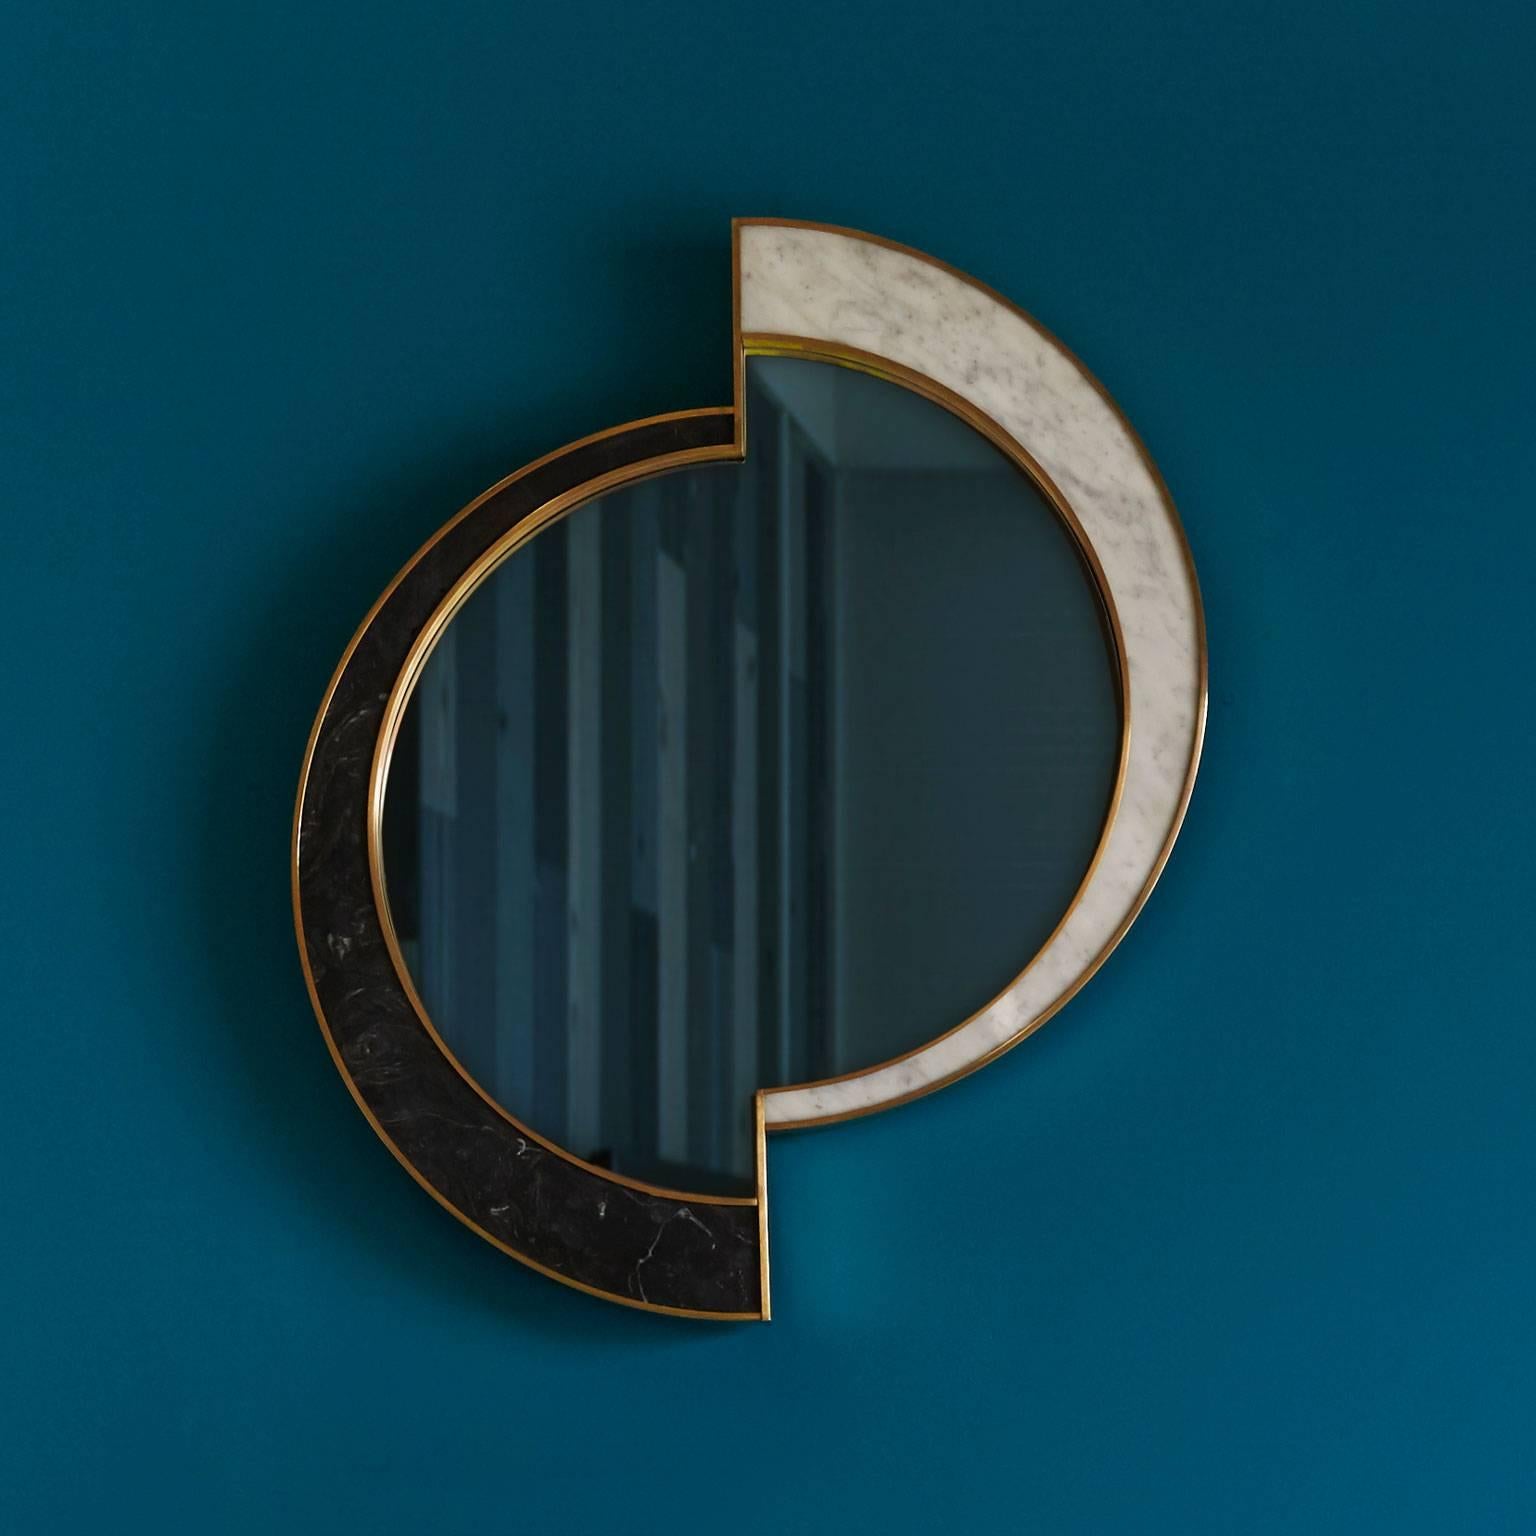 Inspired by the planets and their orbital movements, a recurrent theme in Lara Bohinc’s work, the Lunar collection features important pieces of furniture, with highly-figured marbles set like jewels within golden rims. Disc shapes bisect or overlay